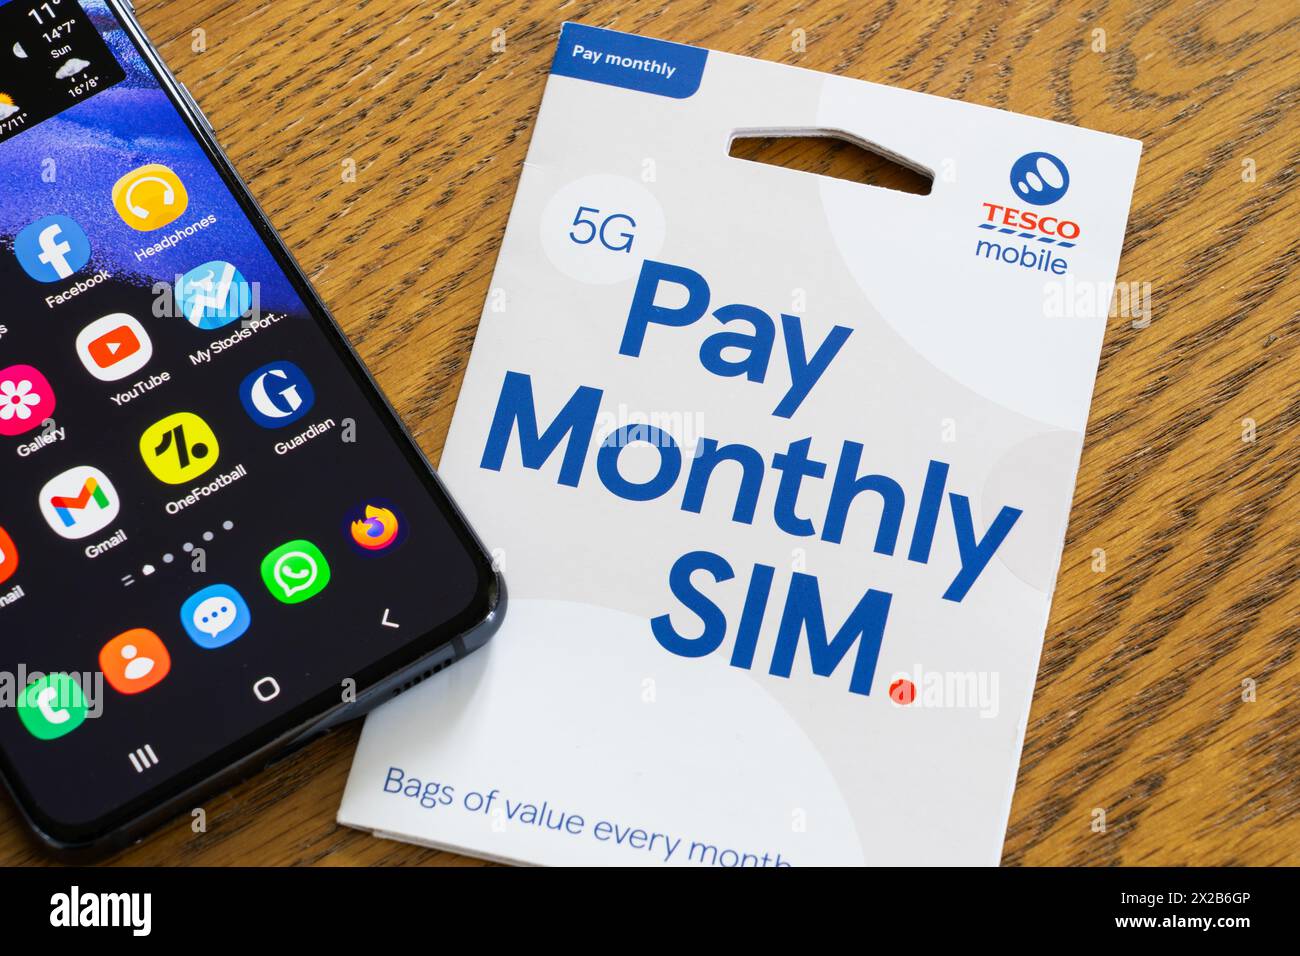 Tesco Mobile 5G pay monthly SIM pack with a replacement SIM card, the Tesco Mobile logo and a smartphone, England. Concept: supermarket mobile network Stock Photo